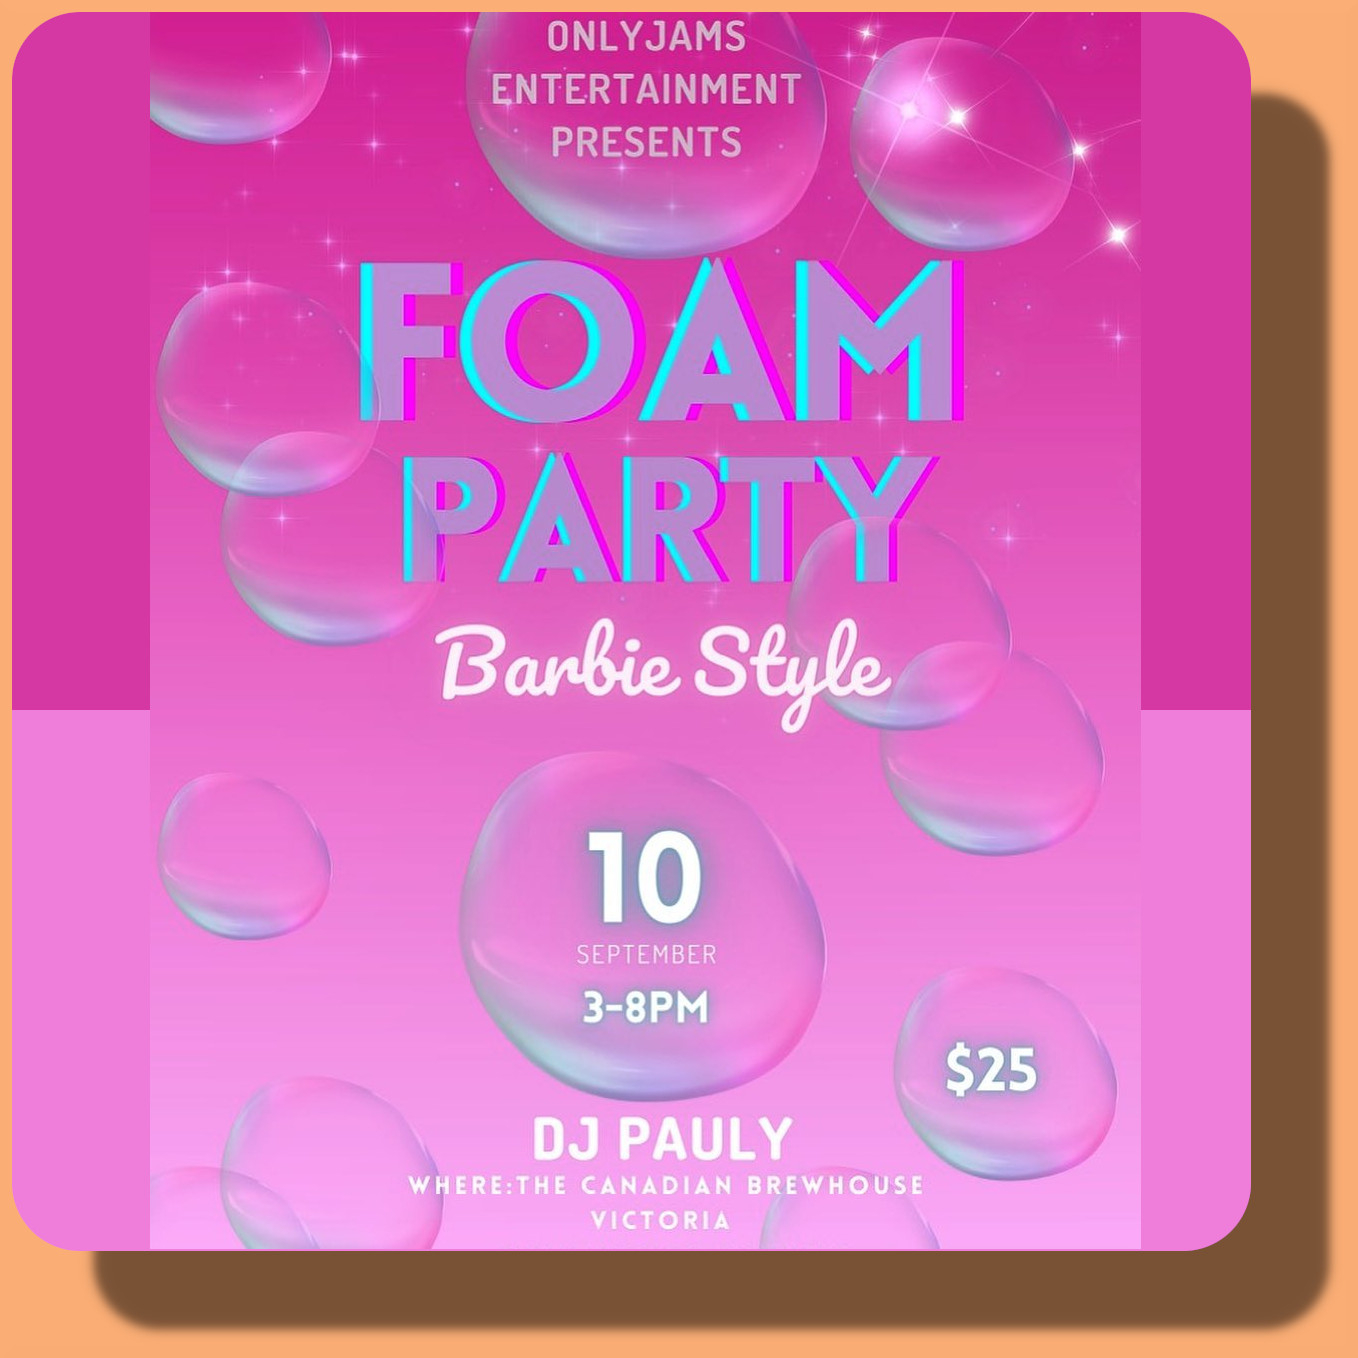 FOAM Party, Victoria: September 10th @ The Canadian Brewhouse